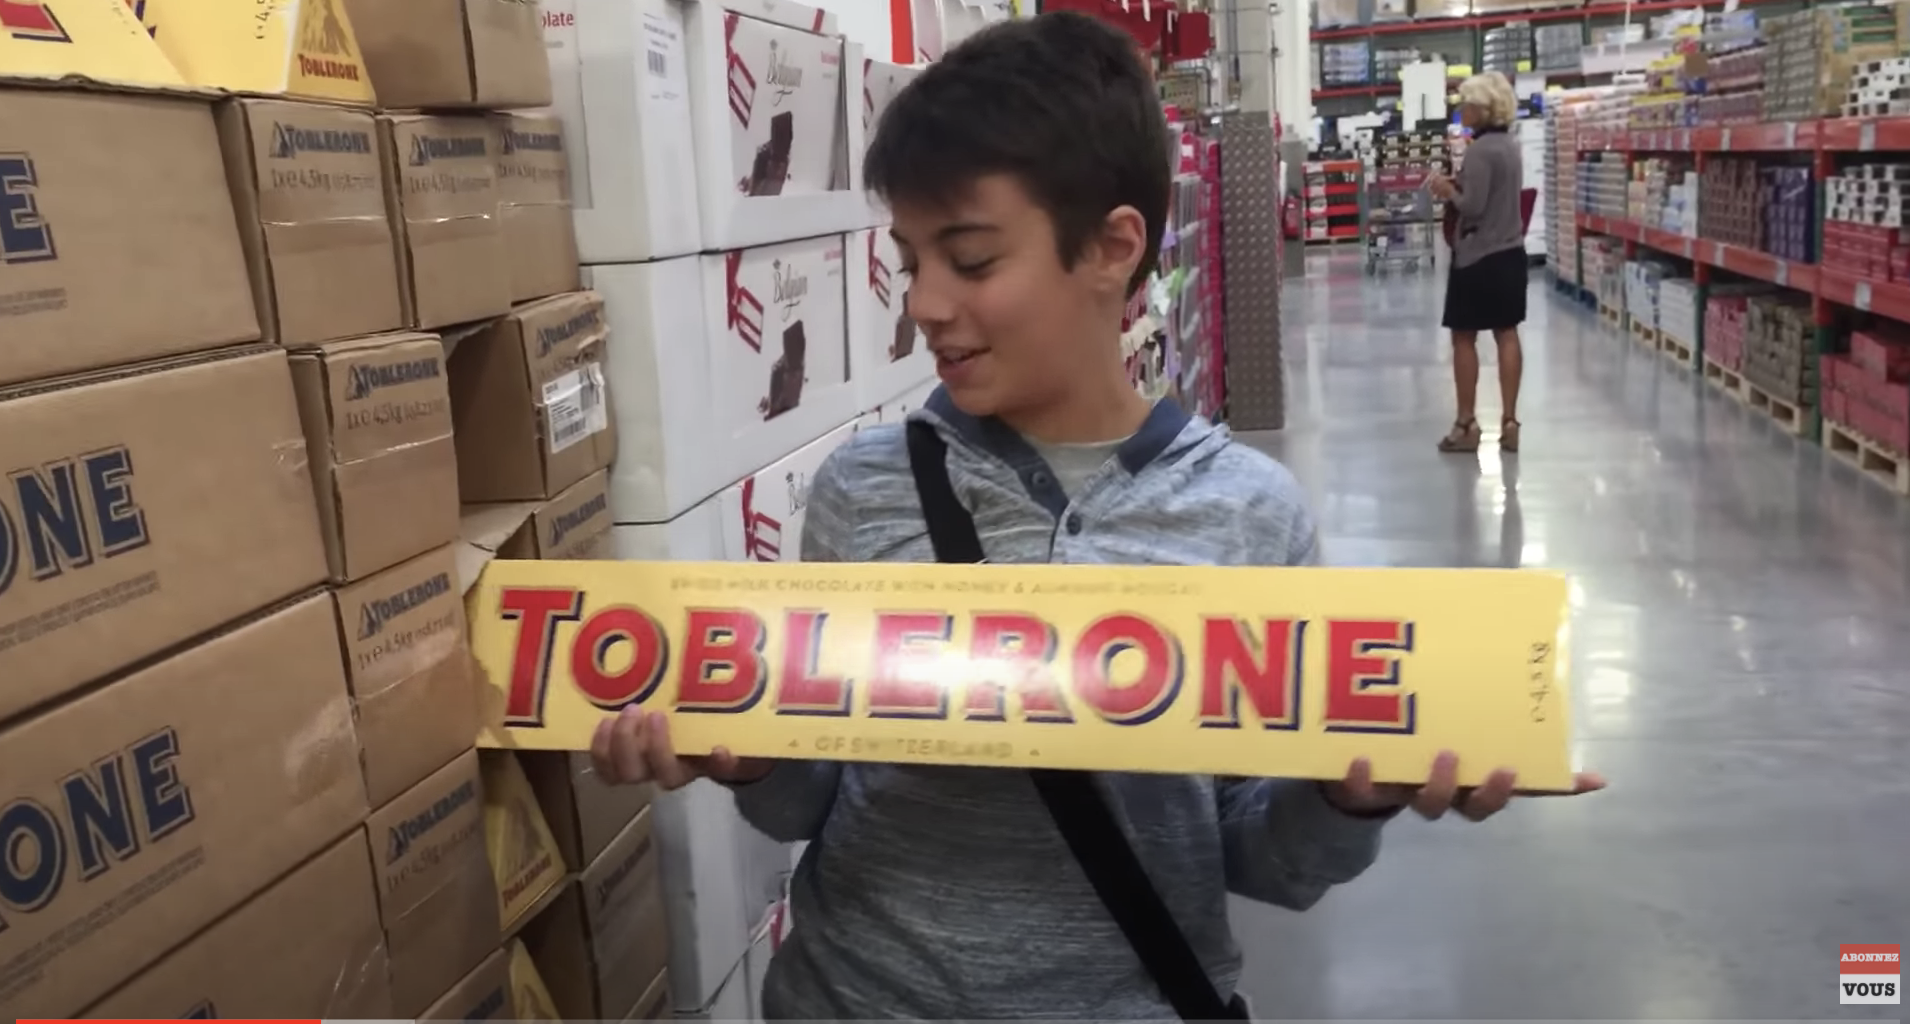 A young boy proudly holding an extremely large bar of Toblerone chocolate